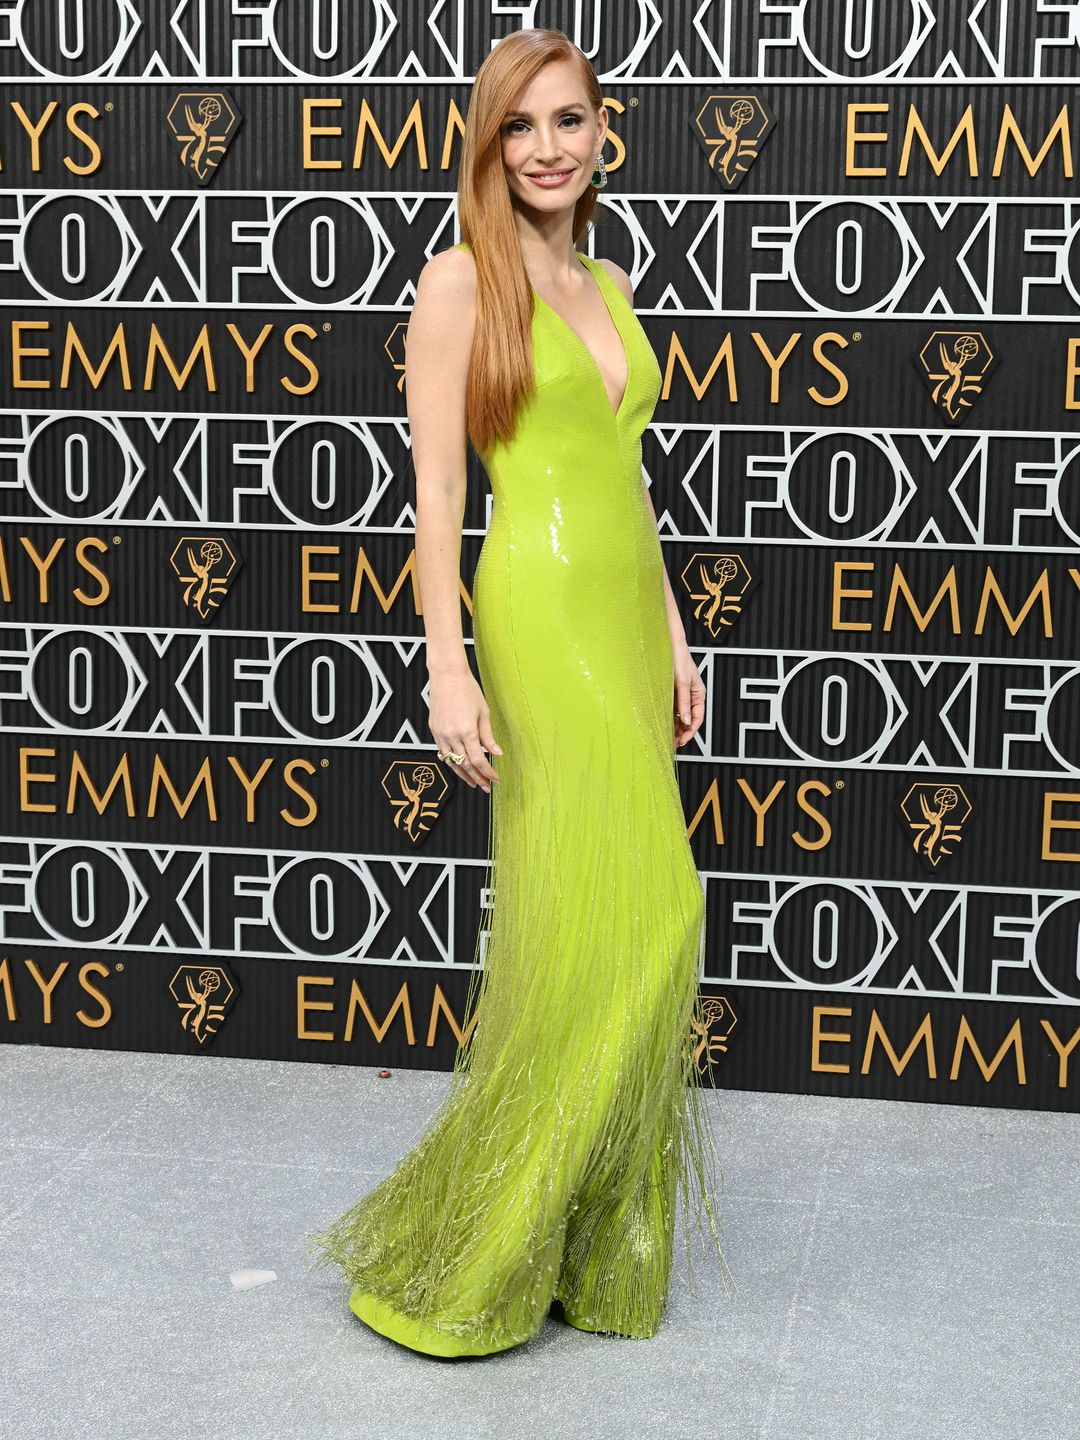 Jessica Chastain wearing lime green at the Emmys 